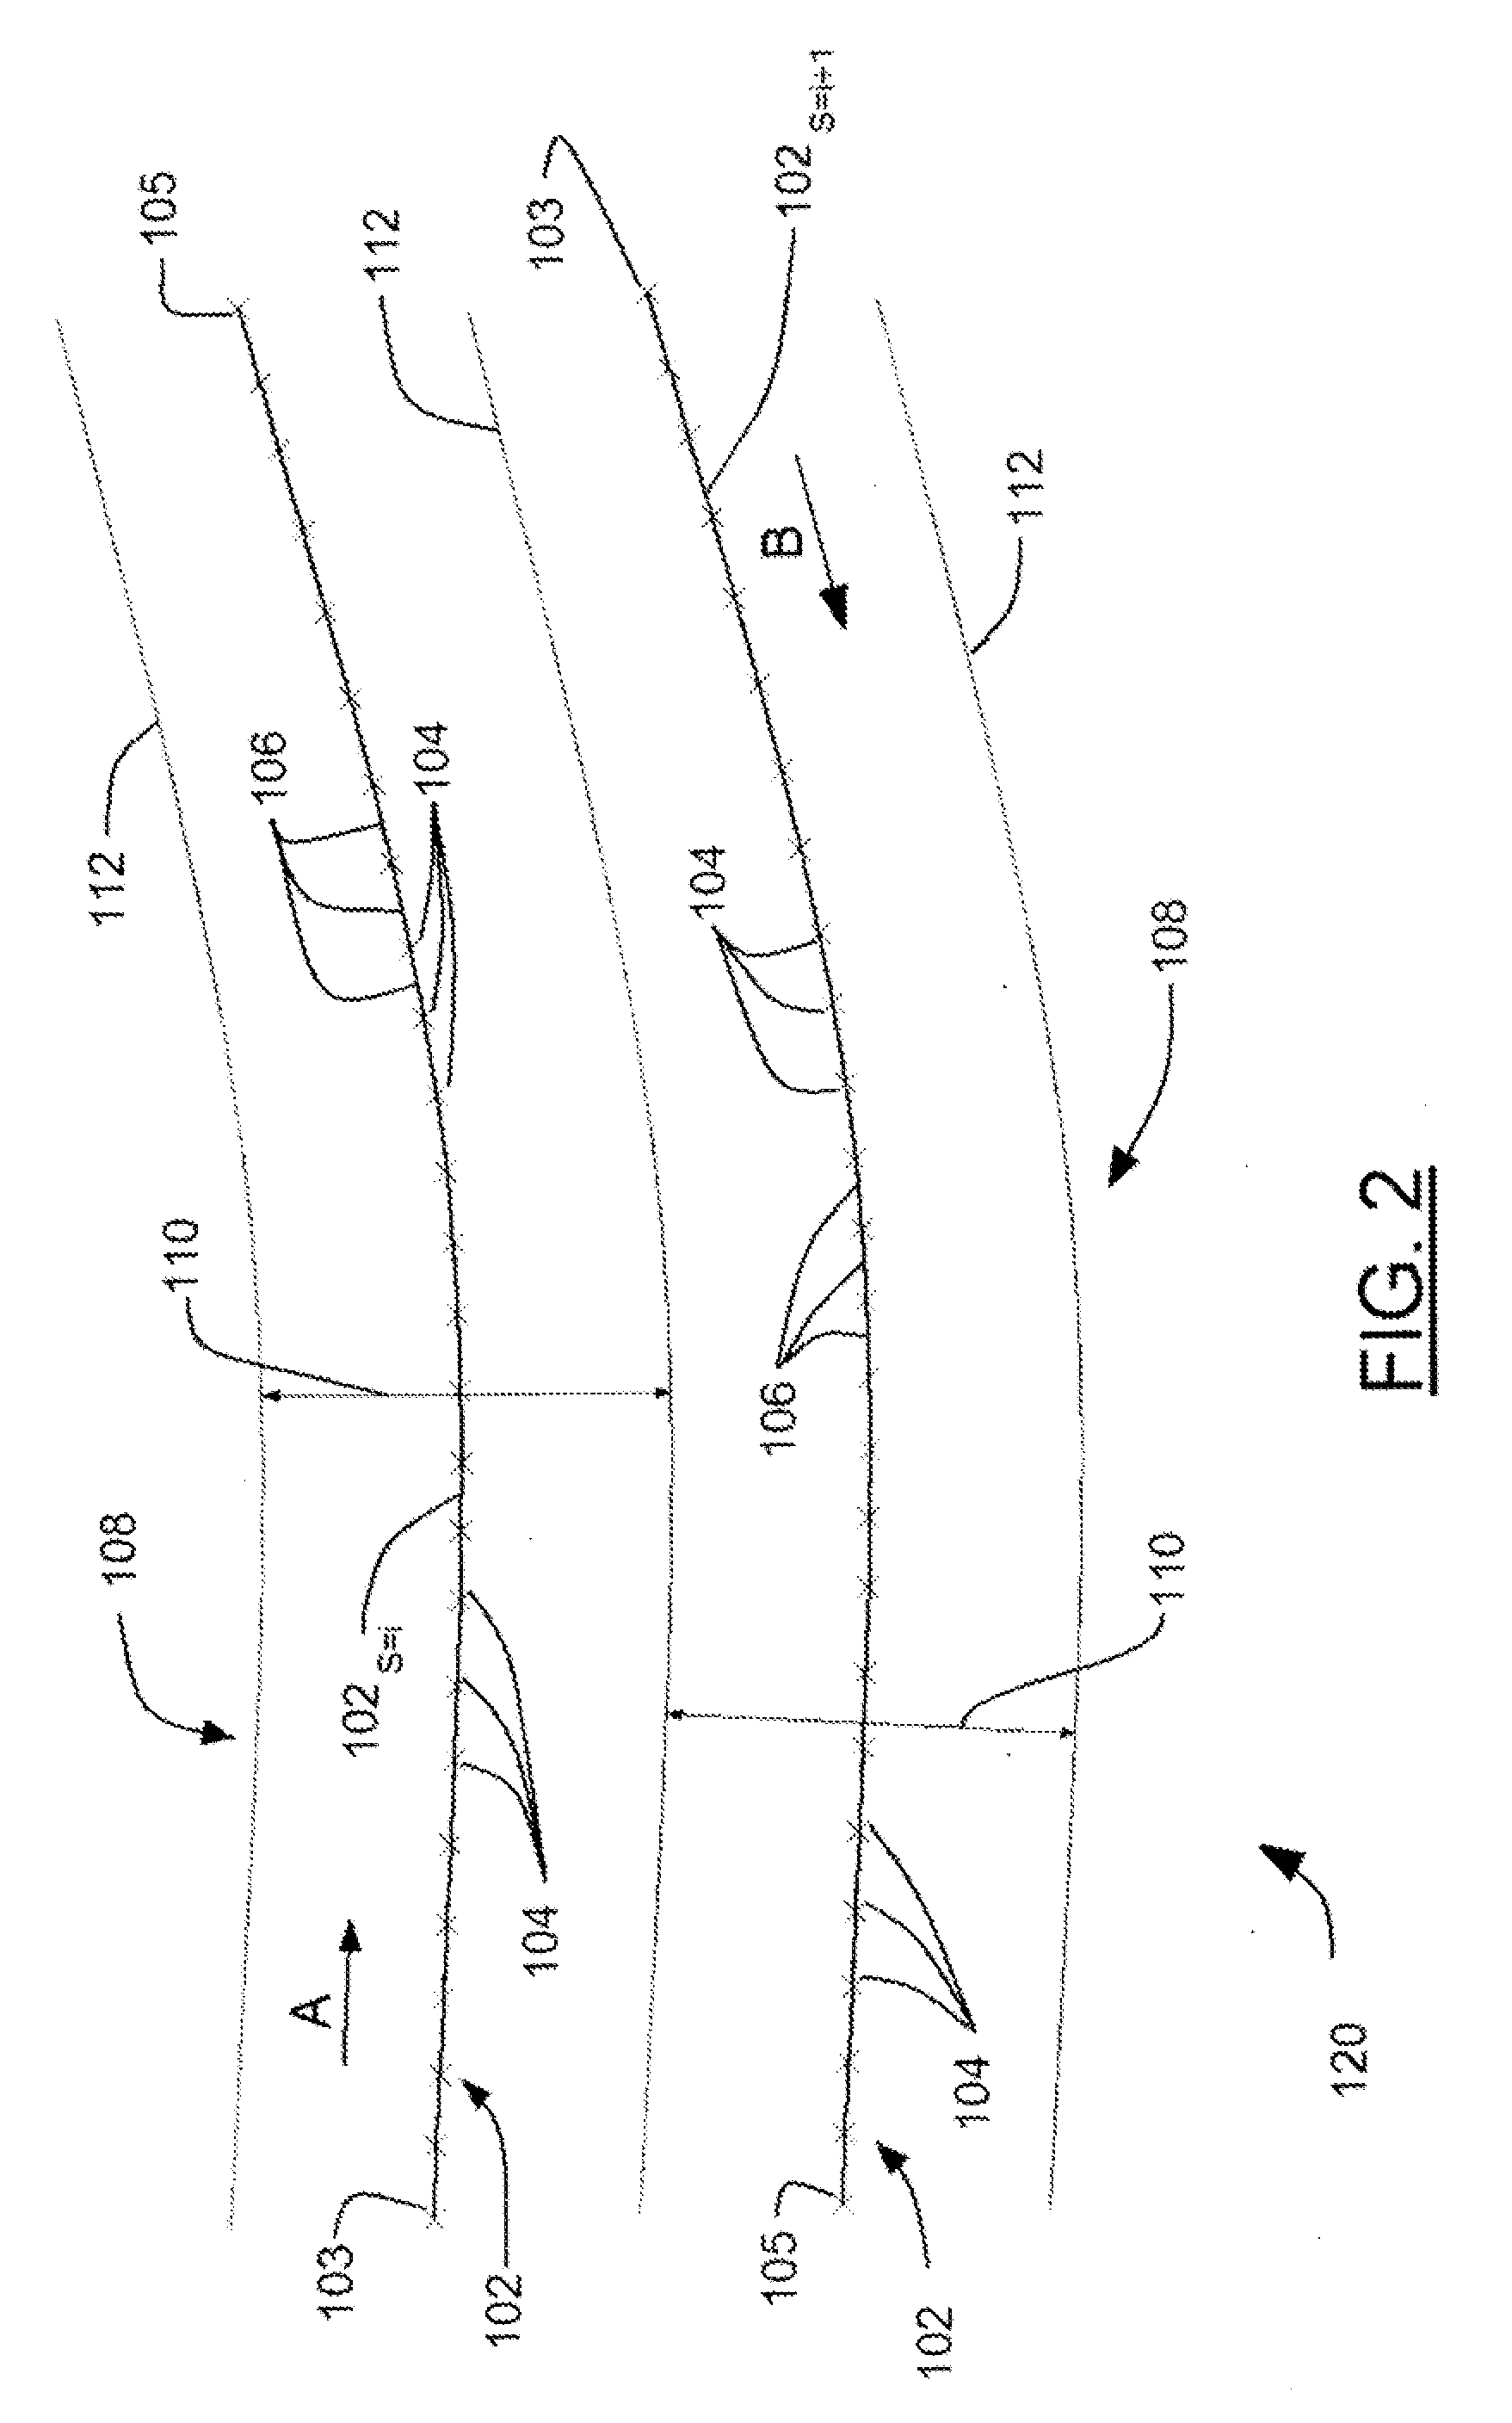 Method for creating end of row turns for agricultural vehicles